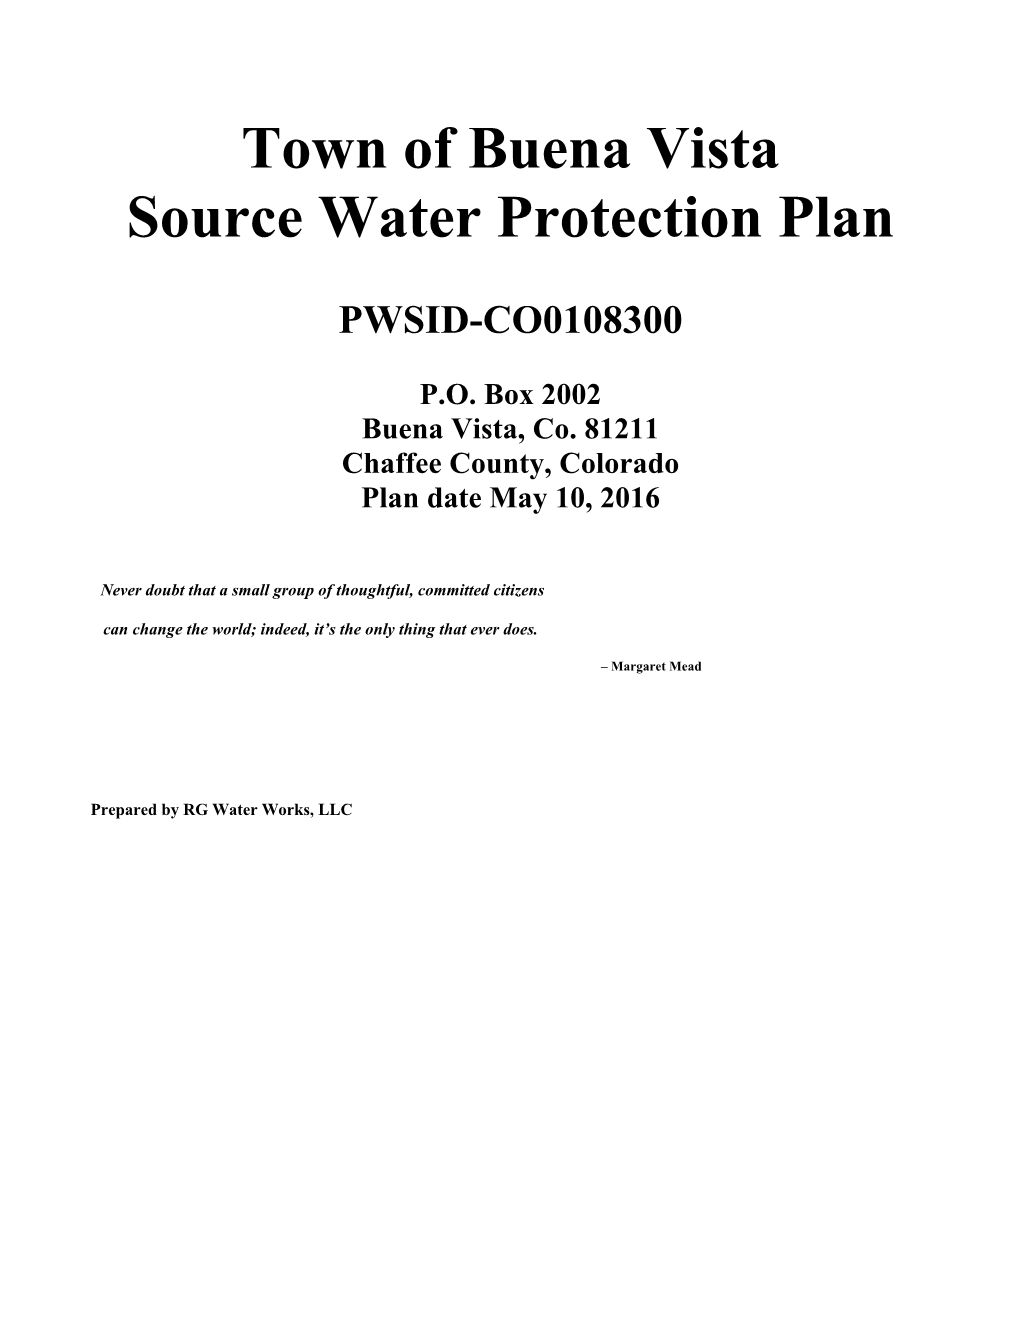 Town of Buena Vista Source Water Protection Plan